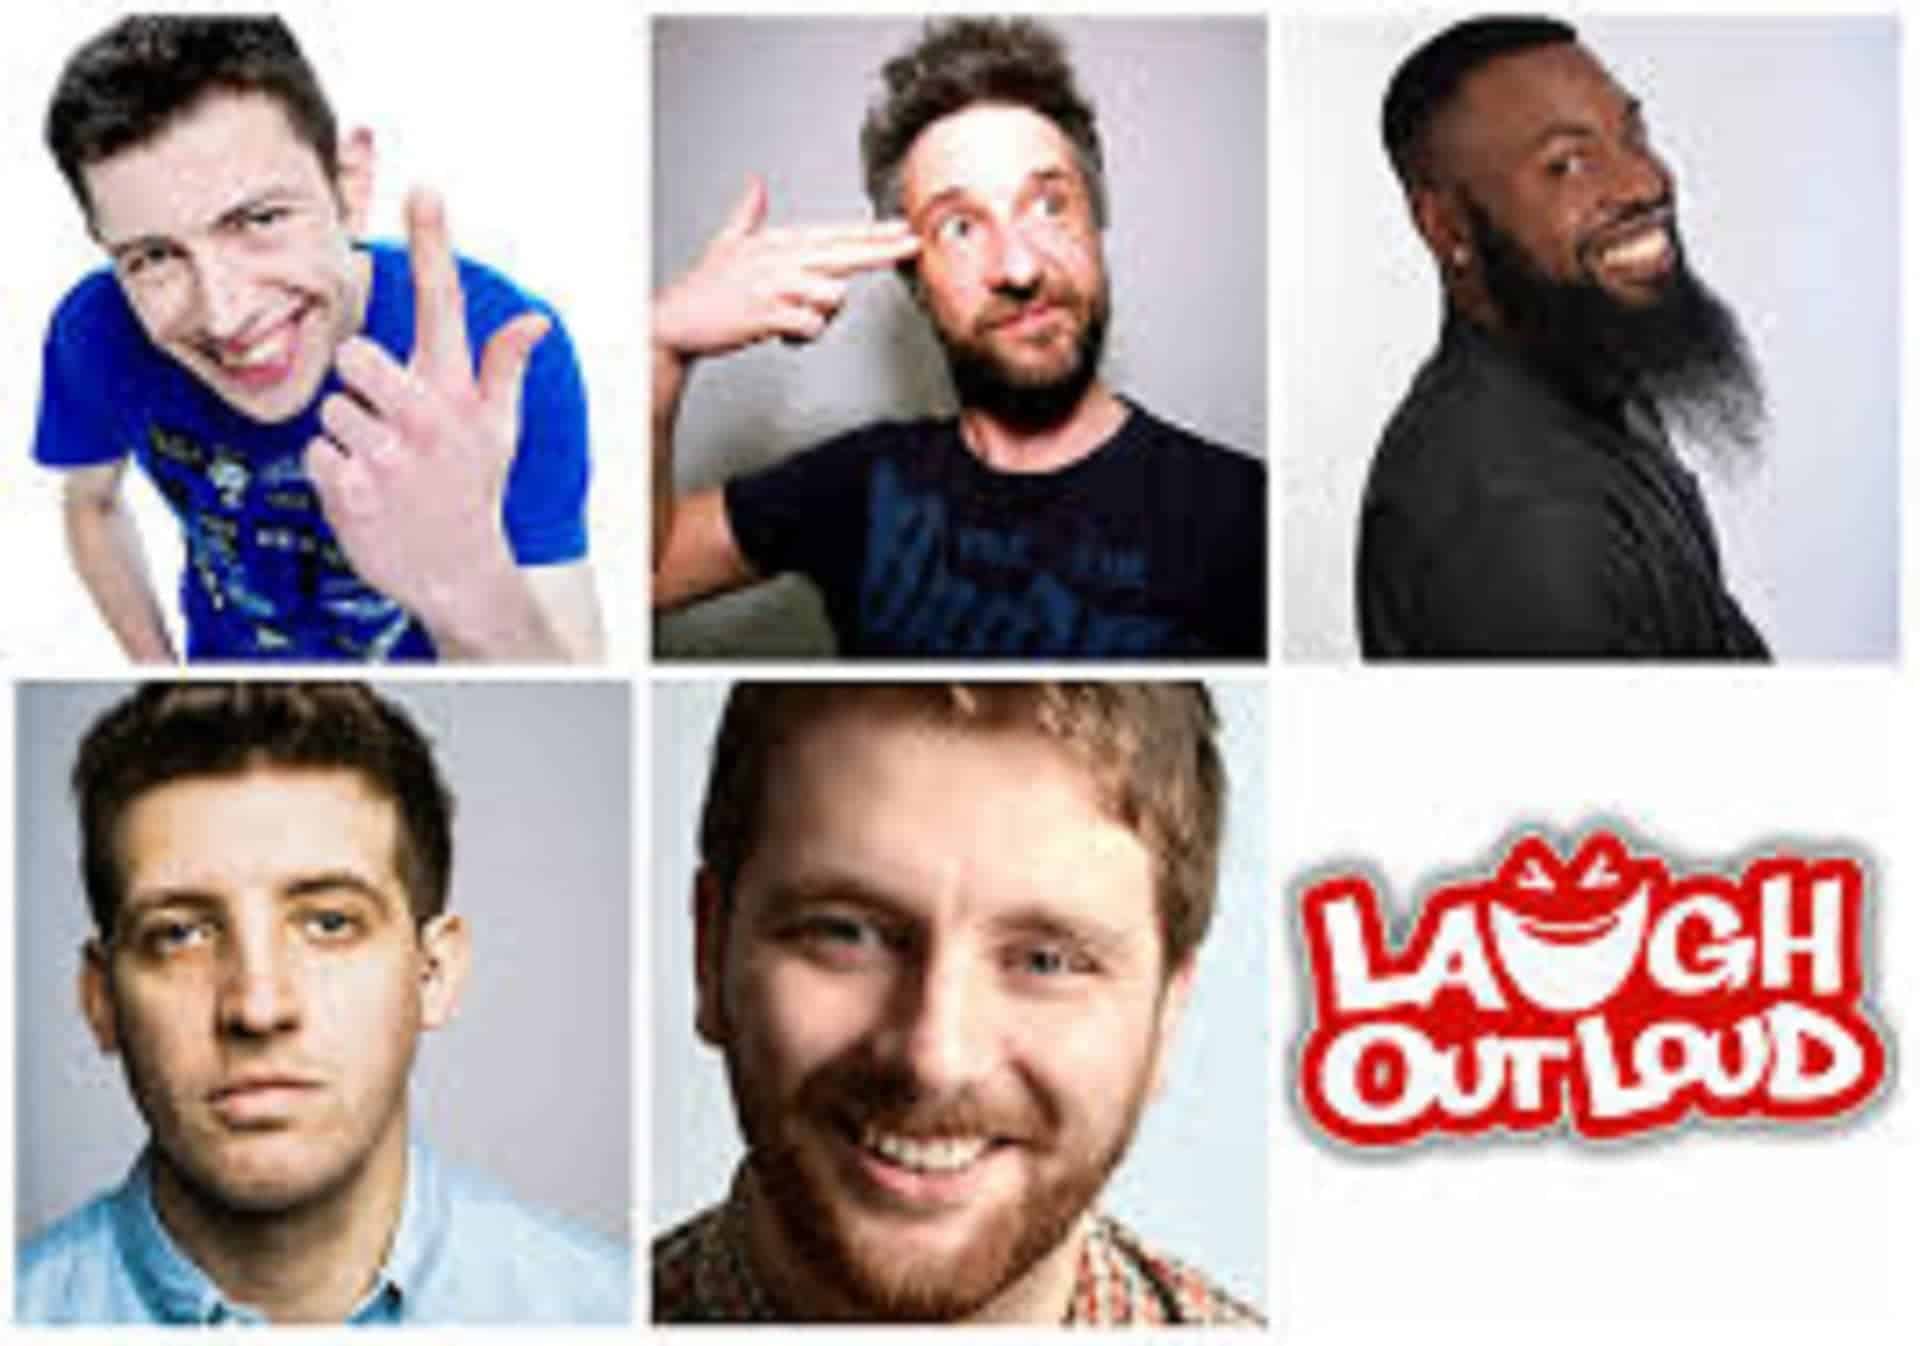 Laugh Out Loud Comedy Club in UK